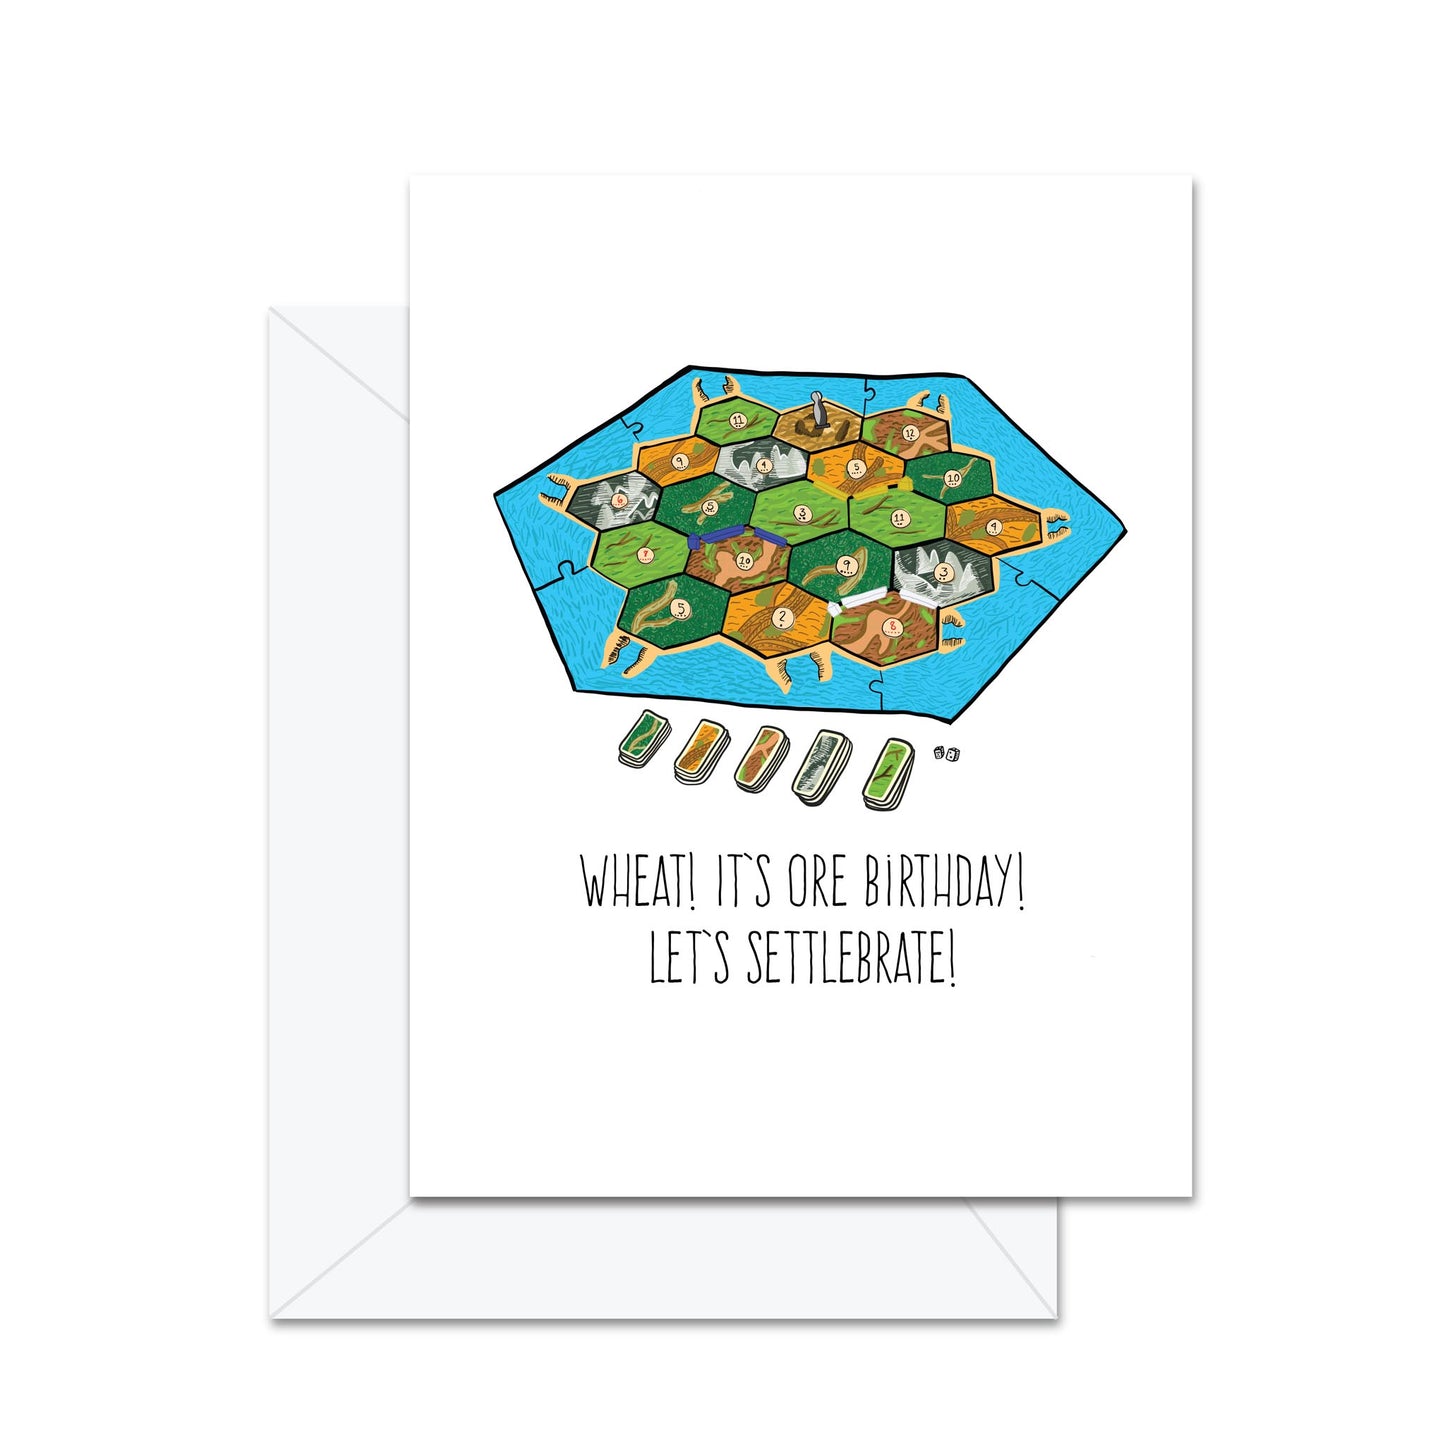 Wheat! It's Ore Birthday! Let's Settlebrate! - Greeting Card